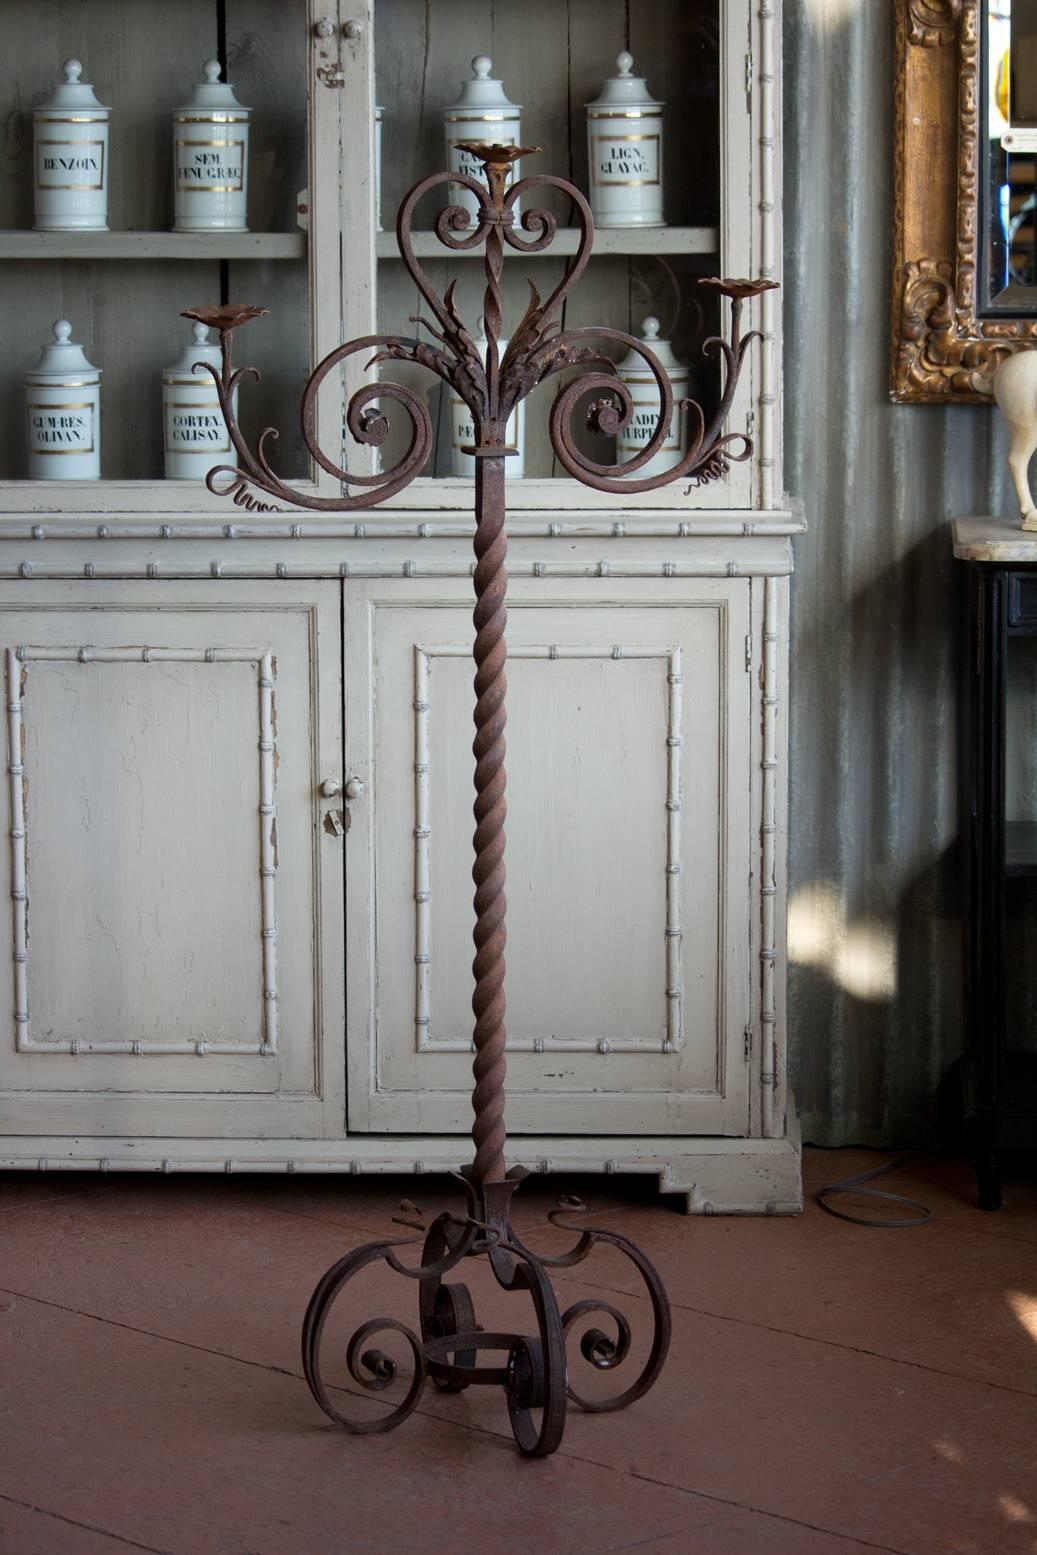 19th century French floor standing wrought iron candelabra with beautiful scroll work and patina.